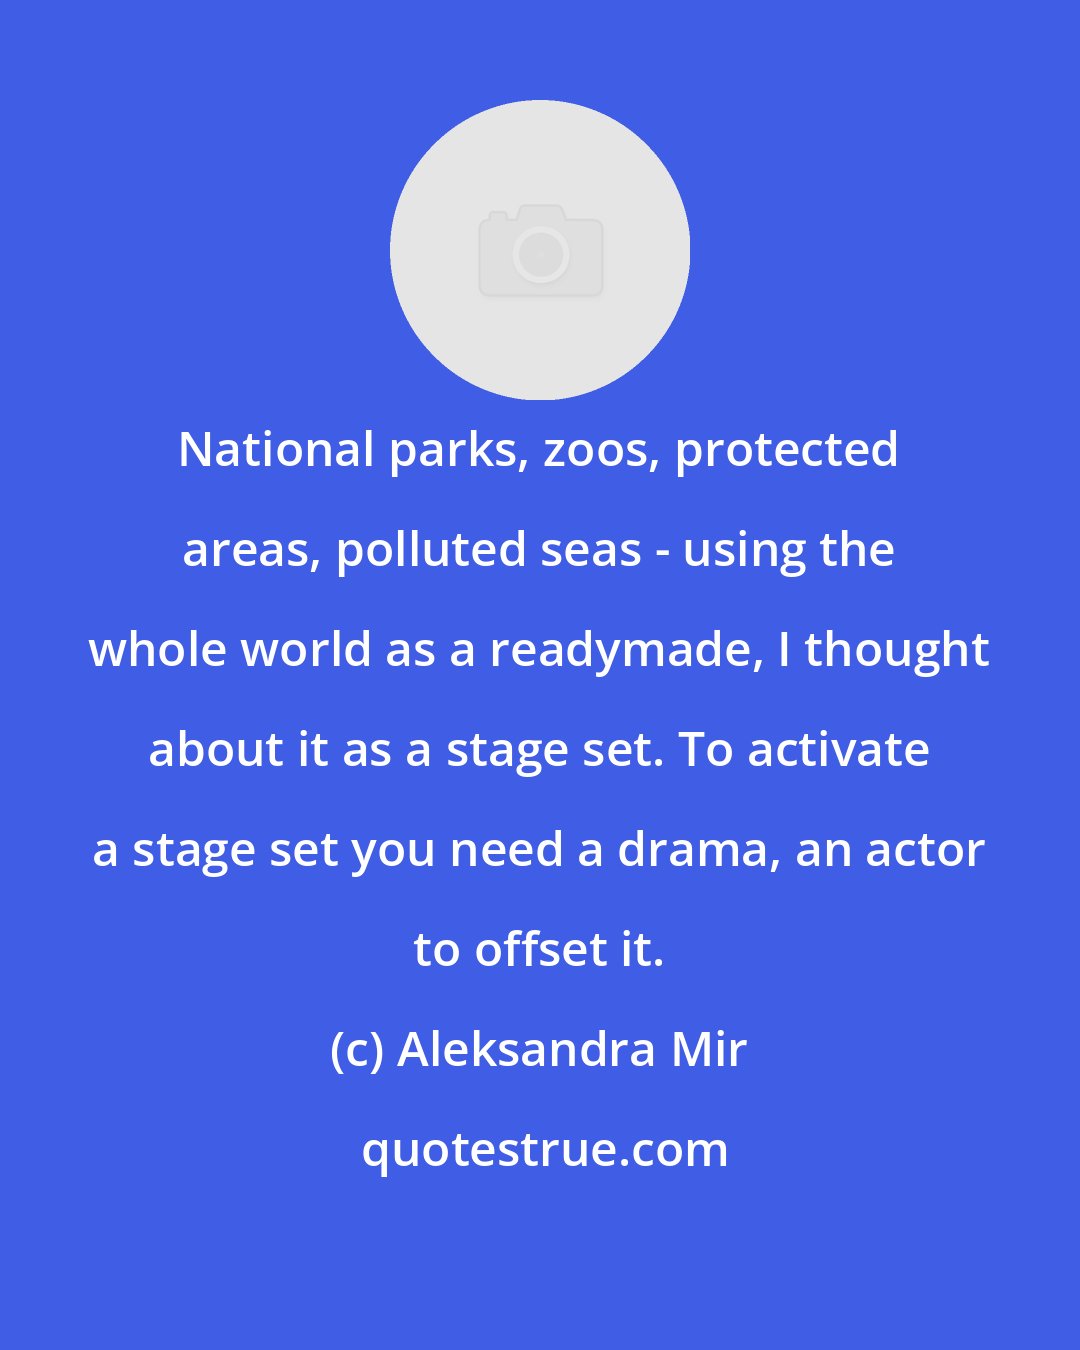 Aleksandra Mir: National parks, zoos, protected areas, polluted seas - using the whole world as a readymade, I thought about it as a stage set. To activate a stage set you need a drama, an actor to offset it.